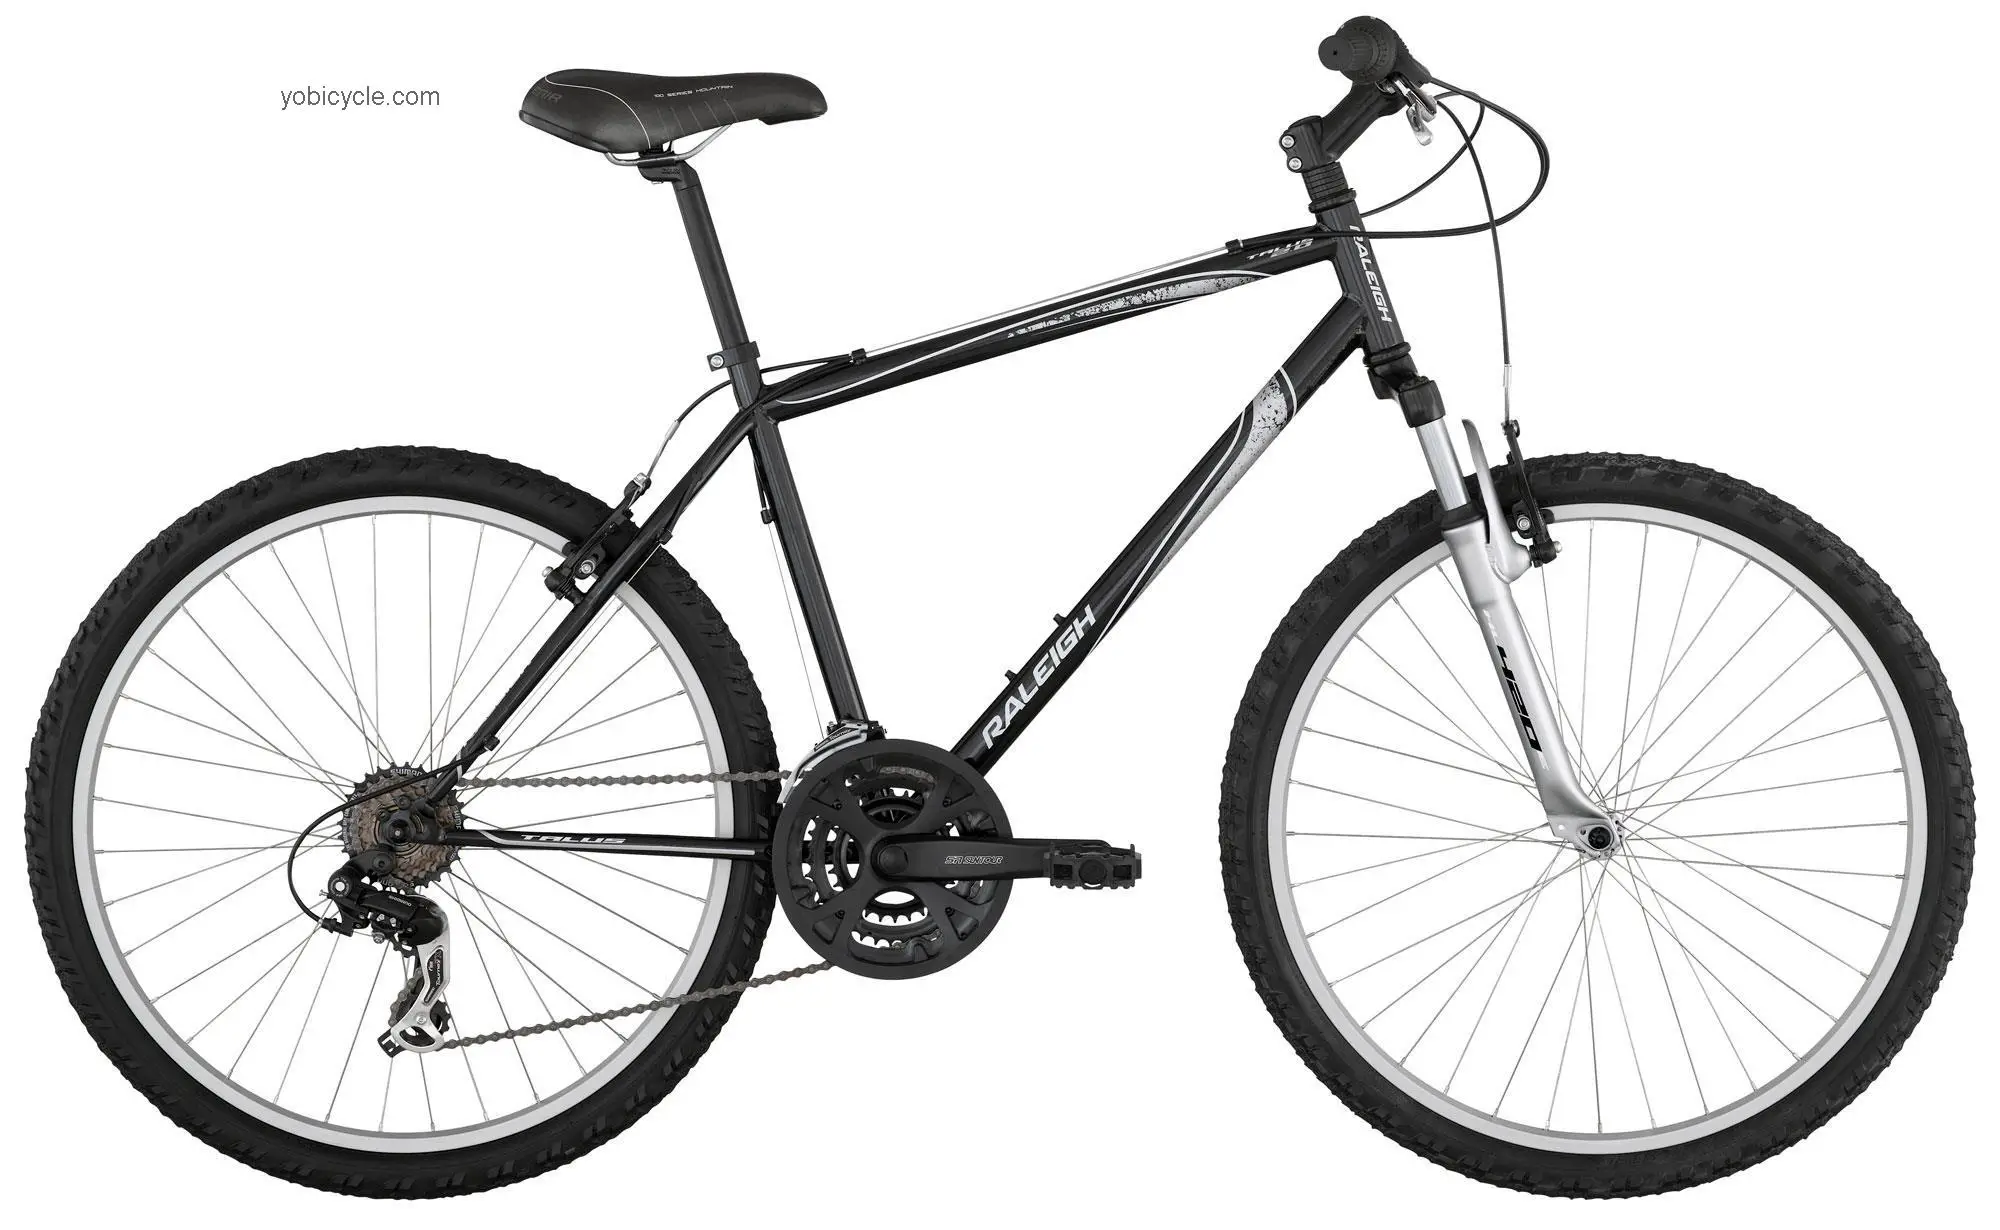 Raleigh Talus 2.0 2012 comparison online with competitors